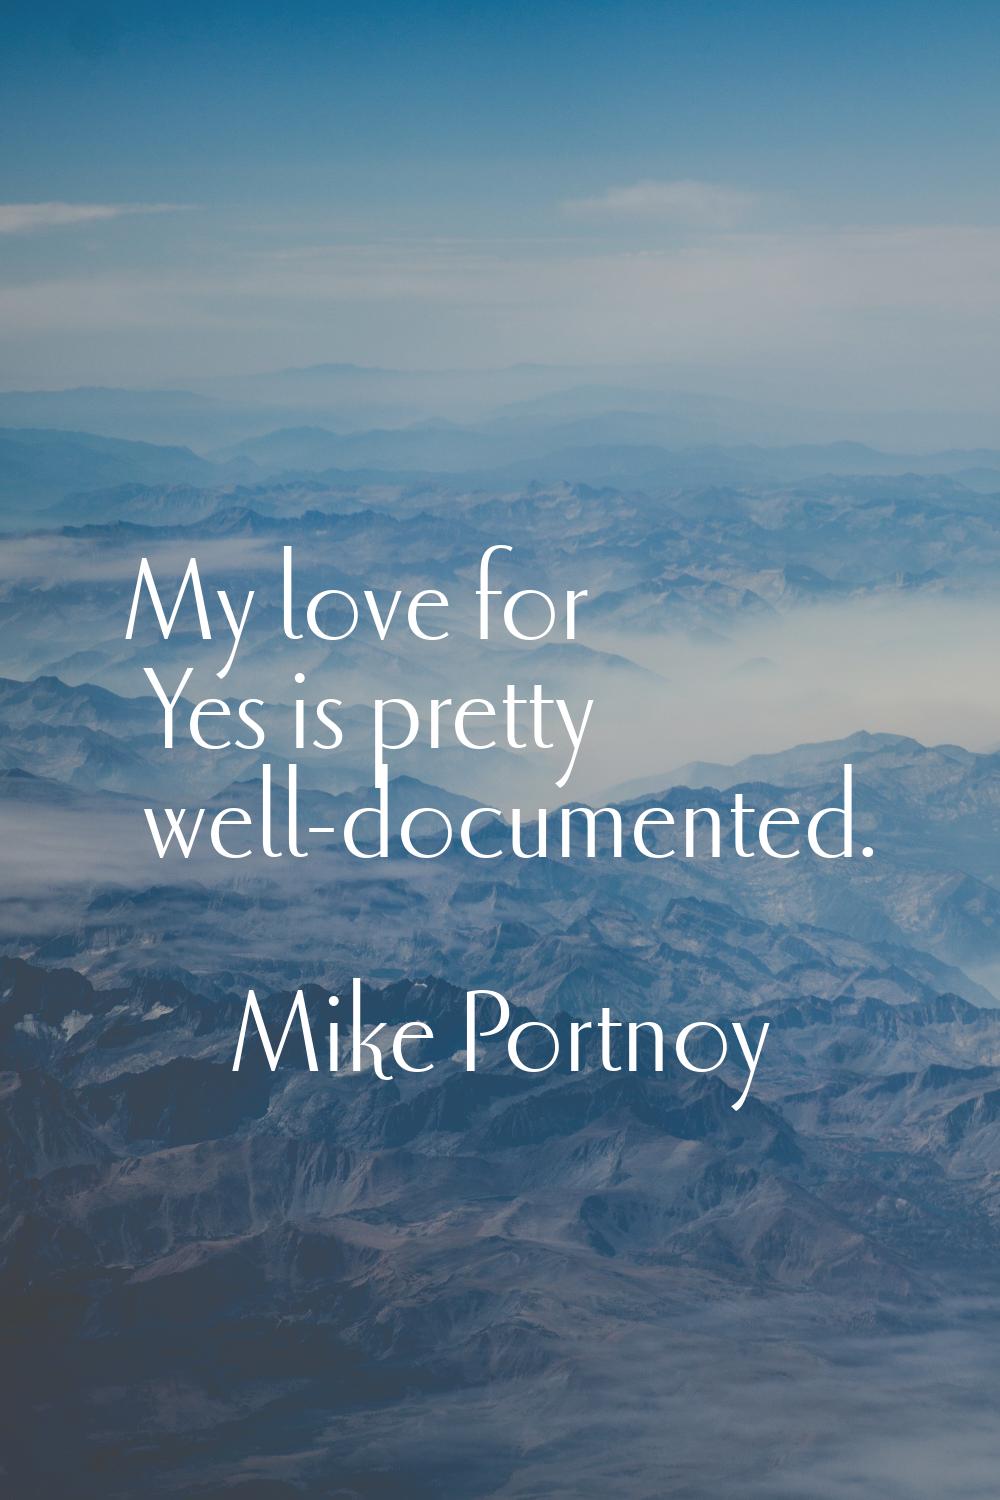 My love for Yes is pretty well-documented.